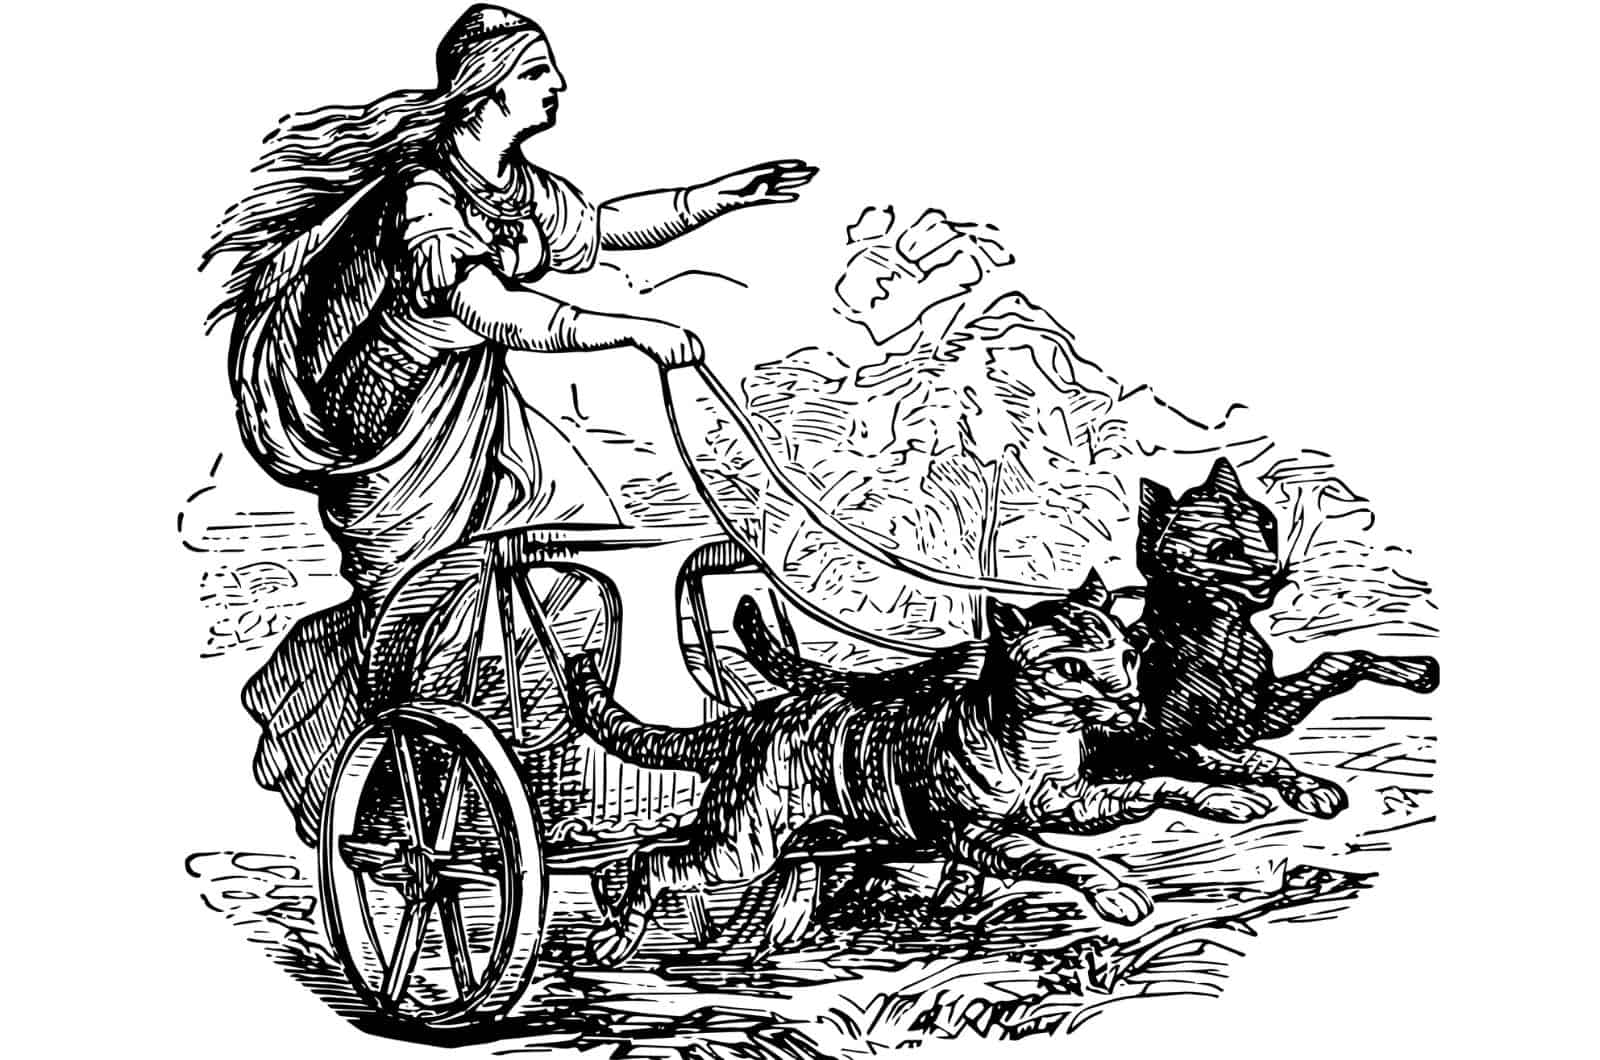 freyja's chariot being pulled by cats